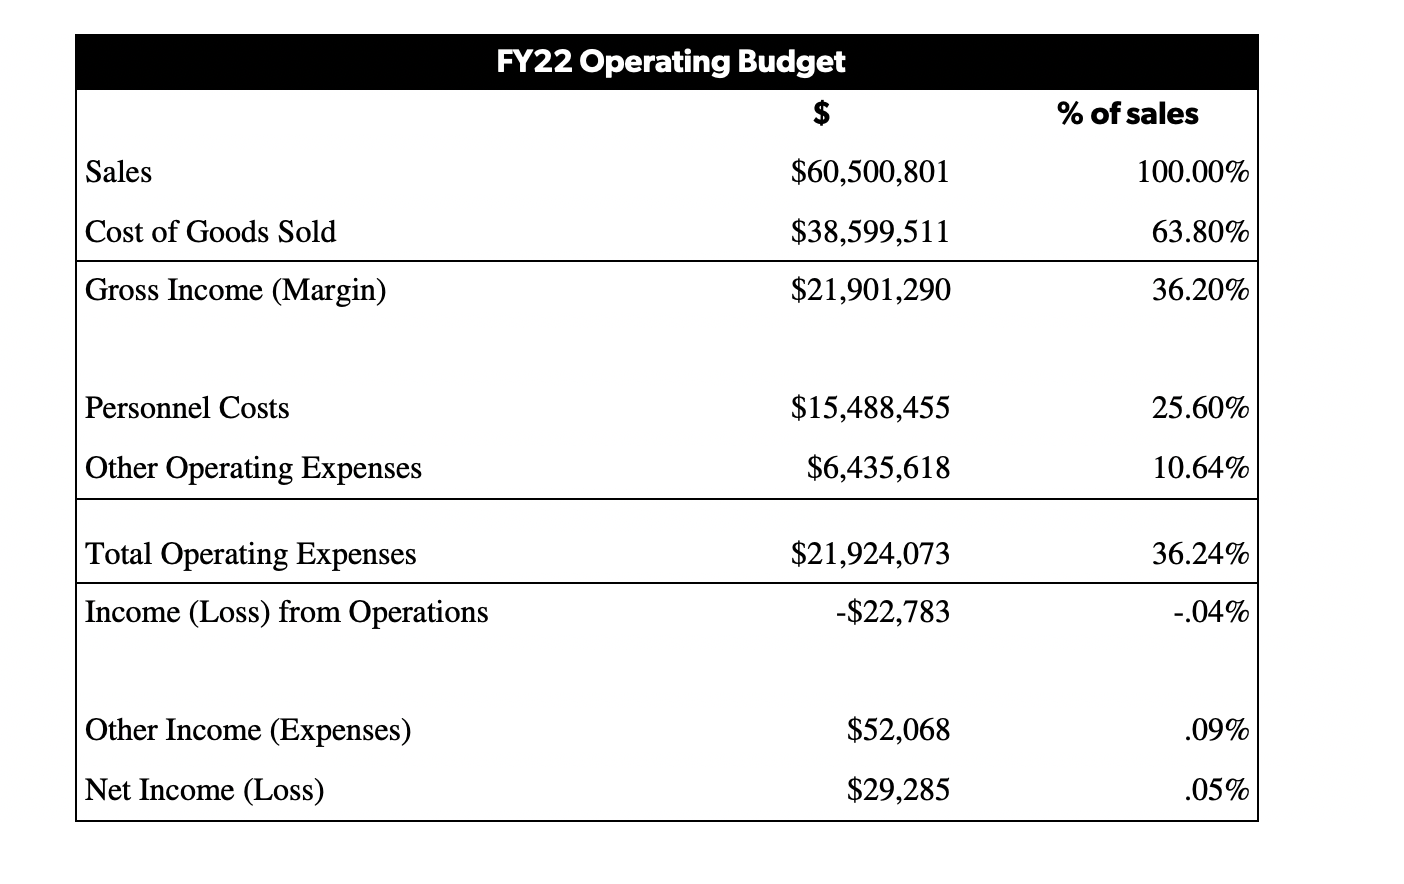 FY22 operating budget